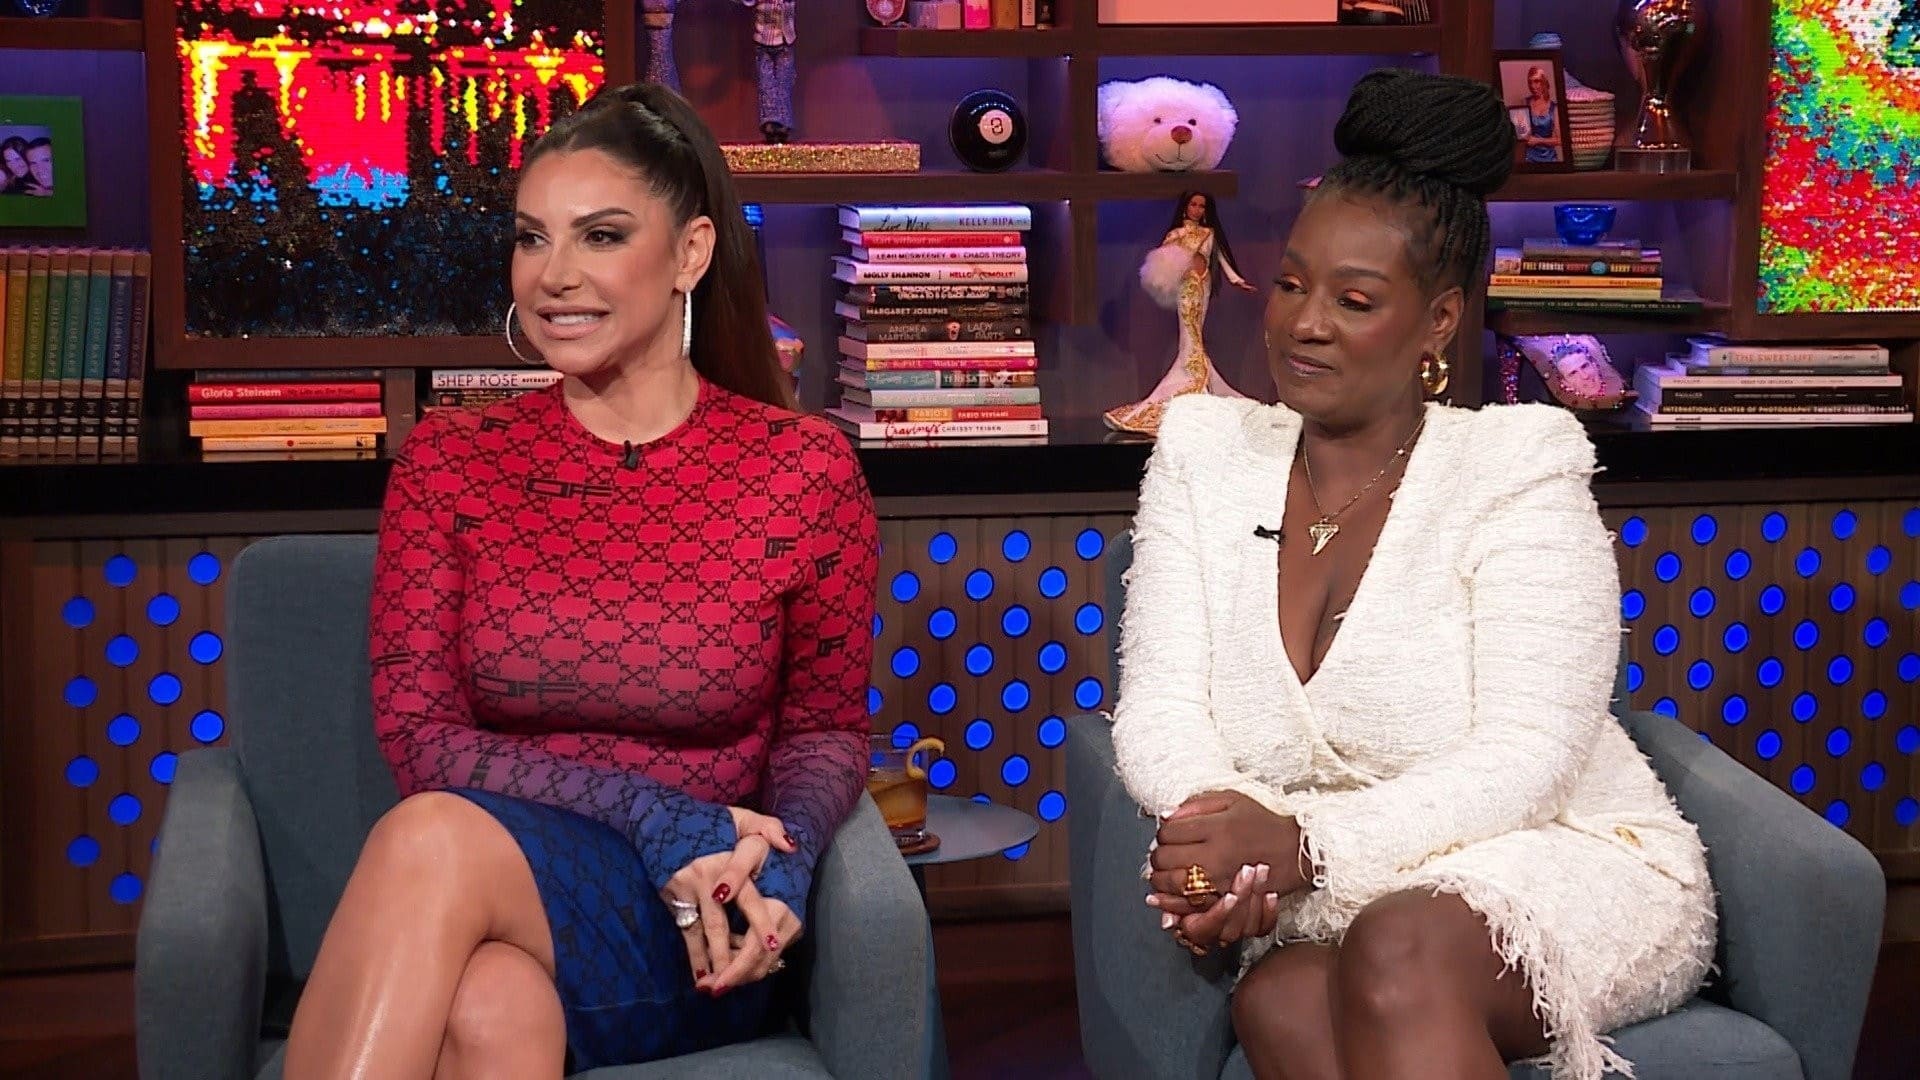 Watch What Happens Live with Andy Cohen Season 20 :Episode 40  Jennifer Aydin and Cirie Fields